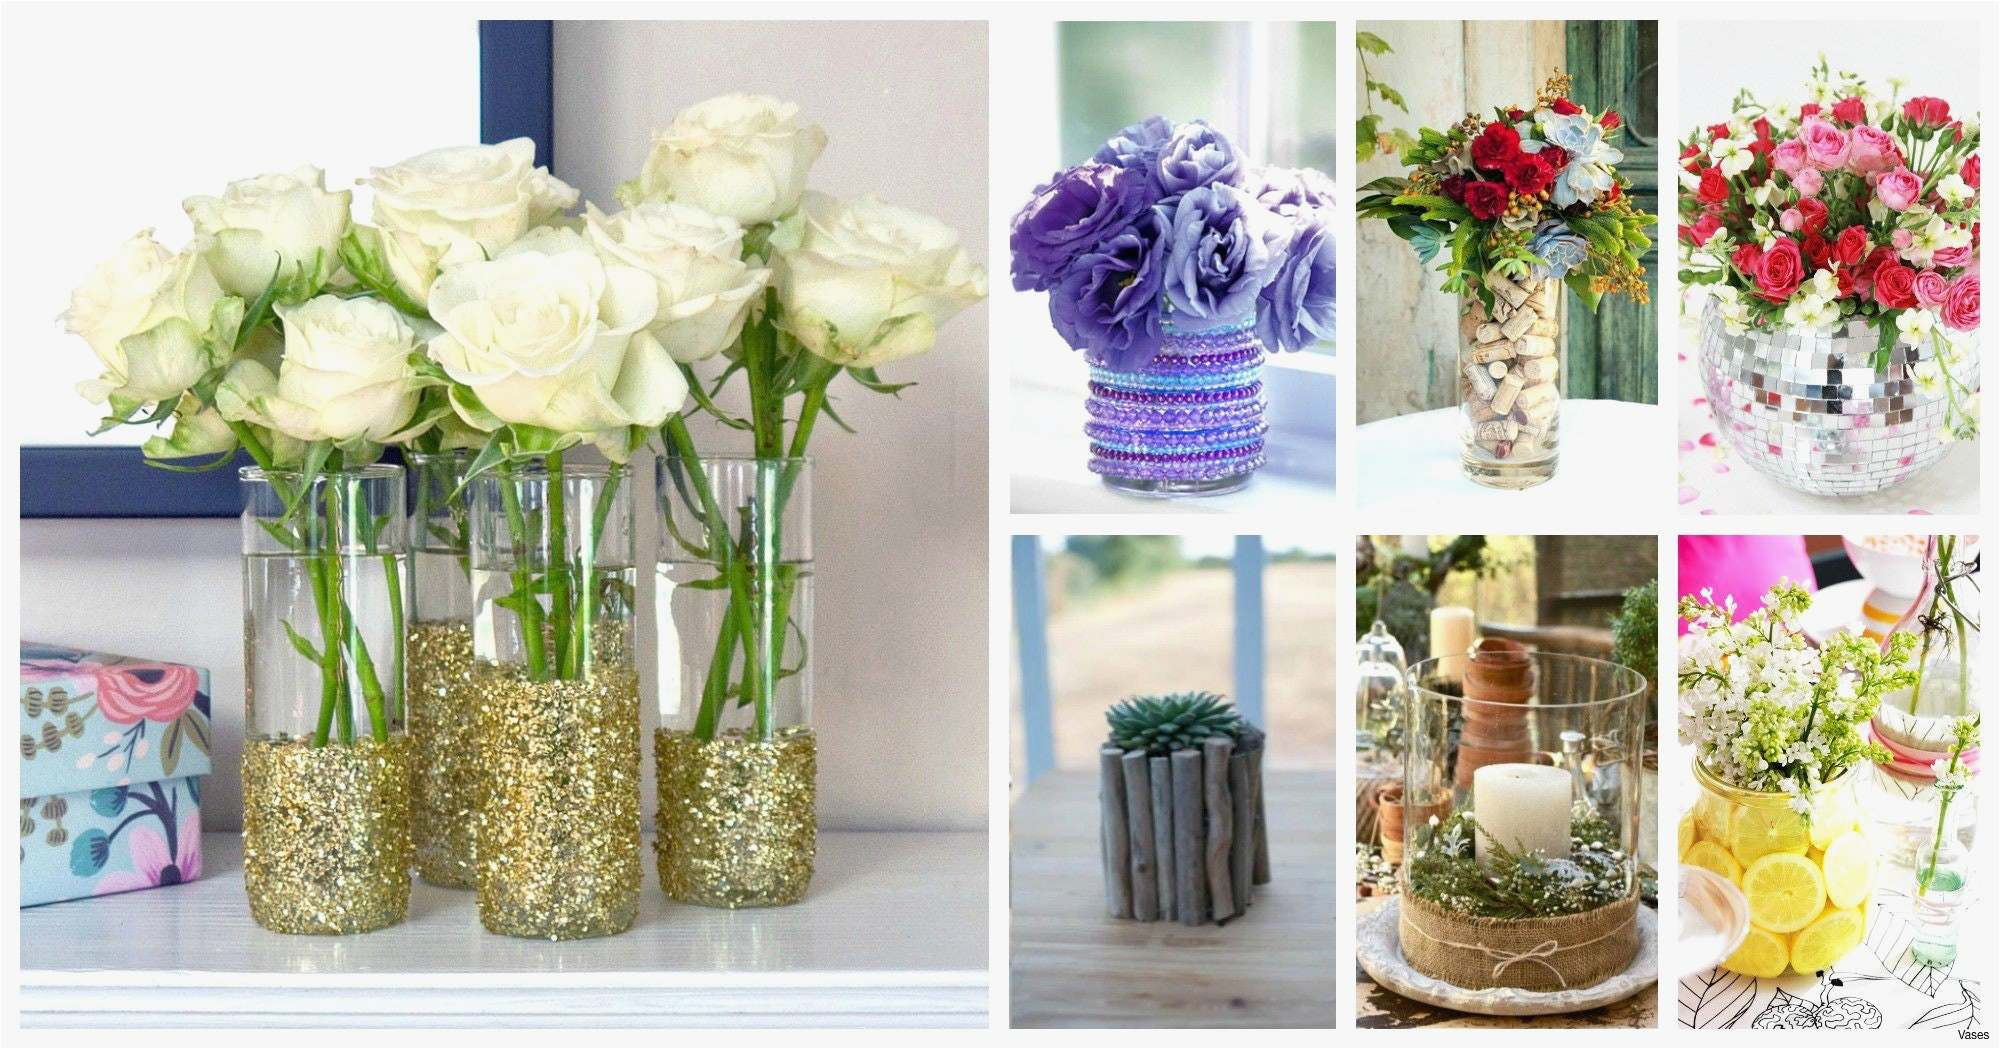 28 Perfect Hammered Metal Vase 2023 free download hammered metal vase of wedding flower centerpieces inspirational wedding flower decorations pertaining to wedding flower centerpieces photo decorating ideas for wedding a bud new dsc h vases